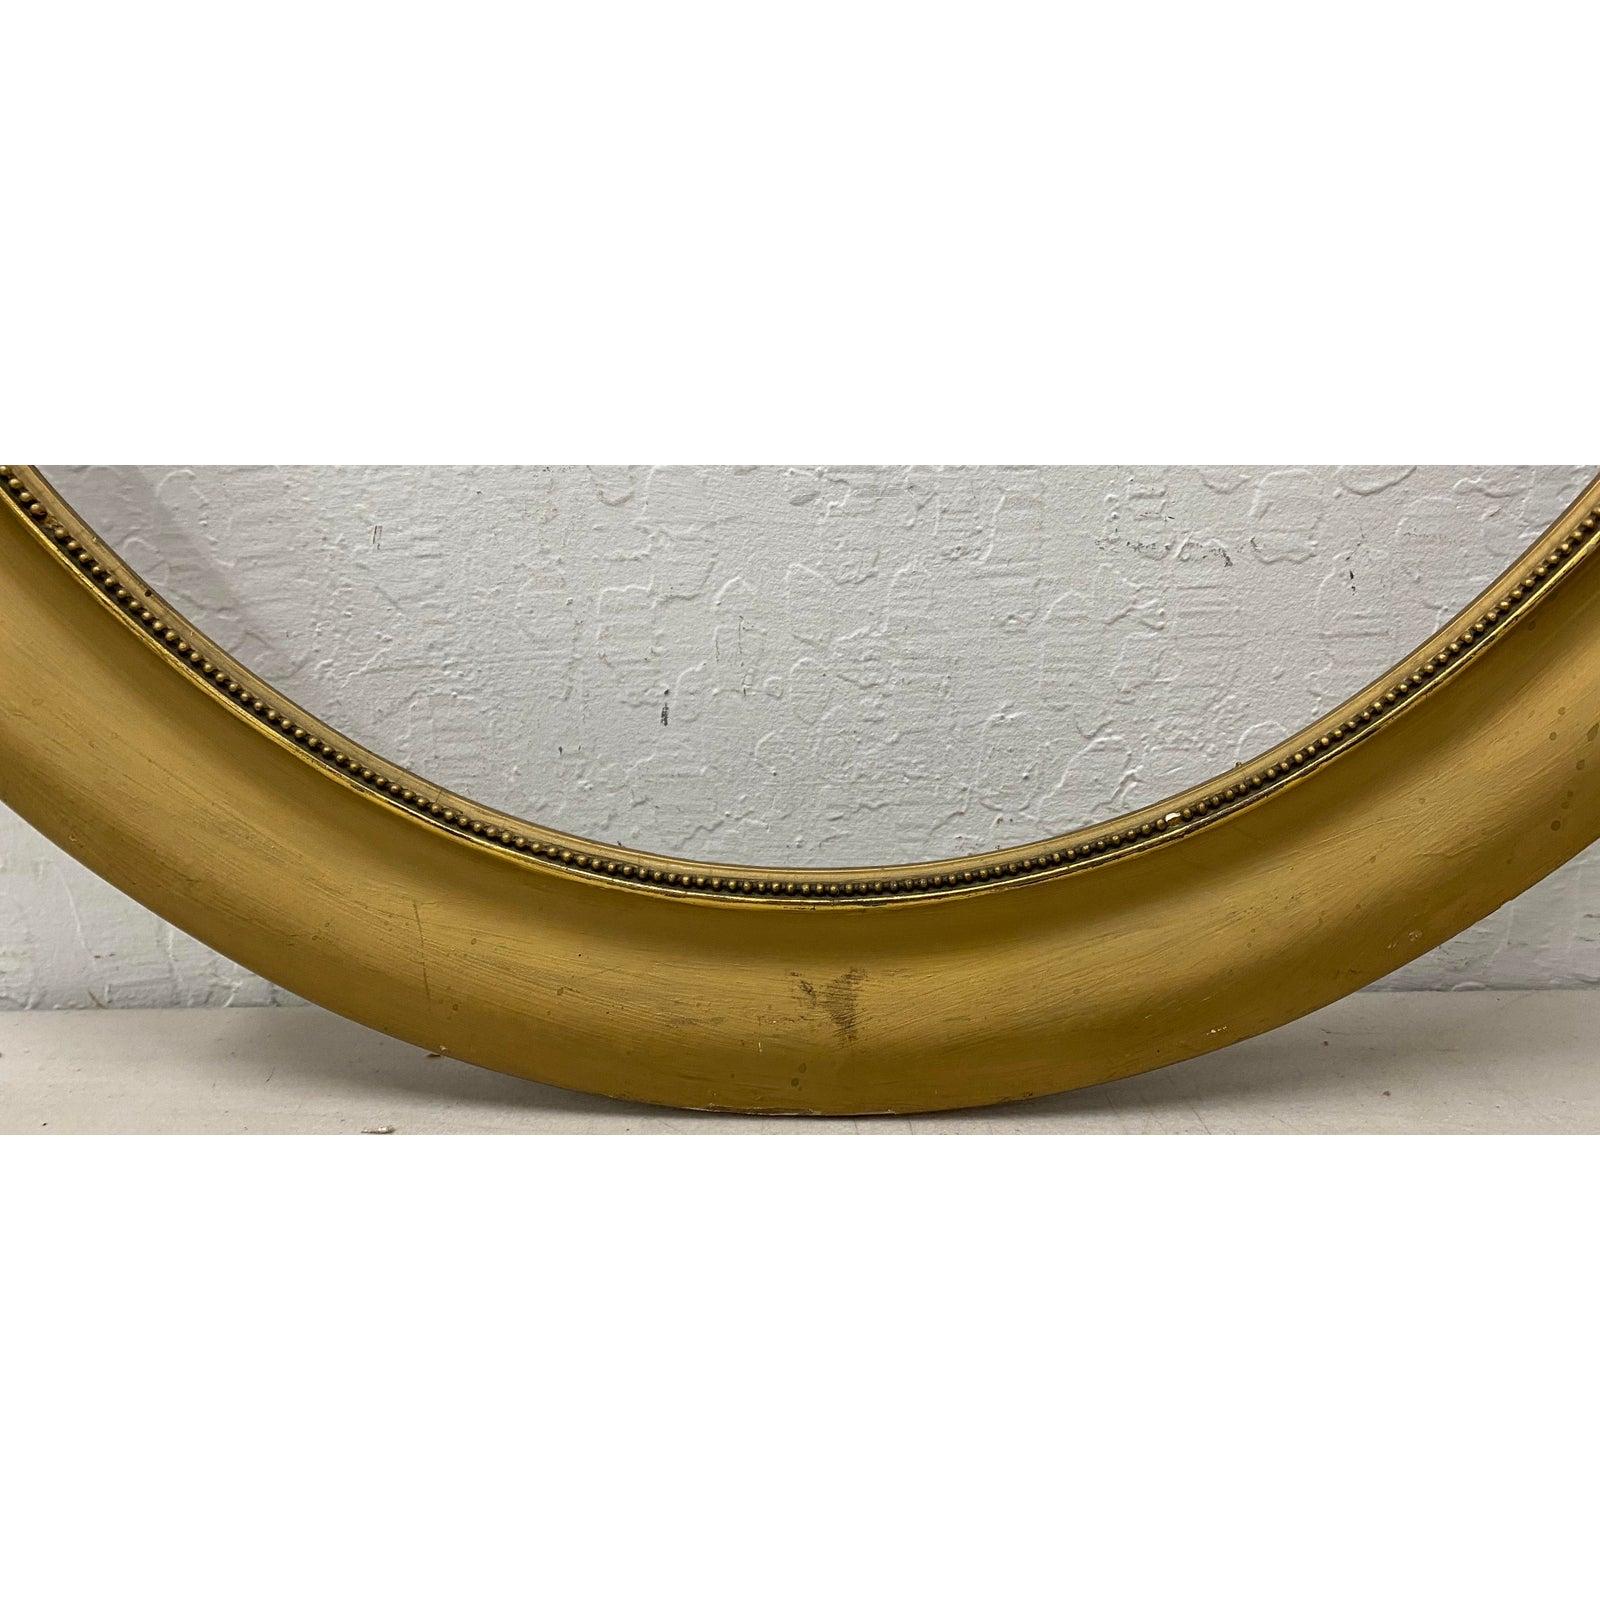 Early 20th century gold painted oval frame

Measures: Opening 21